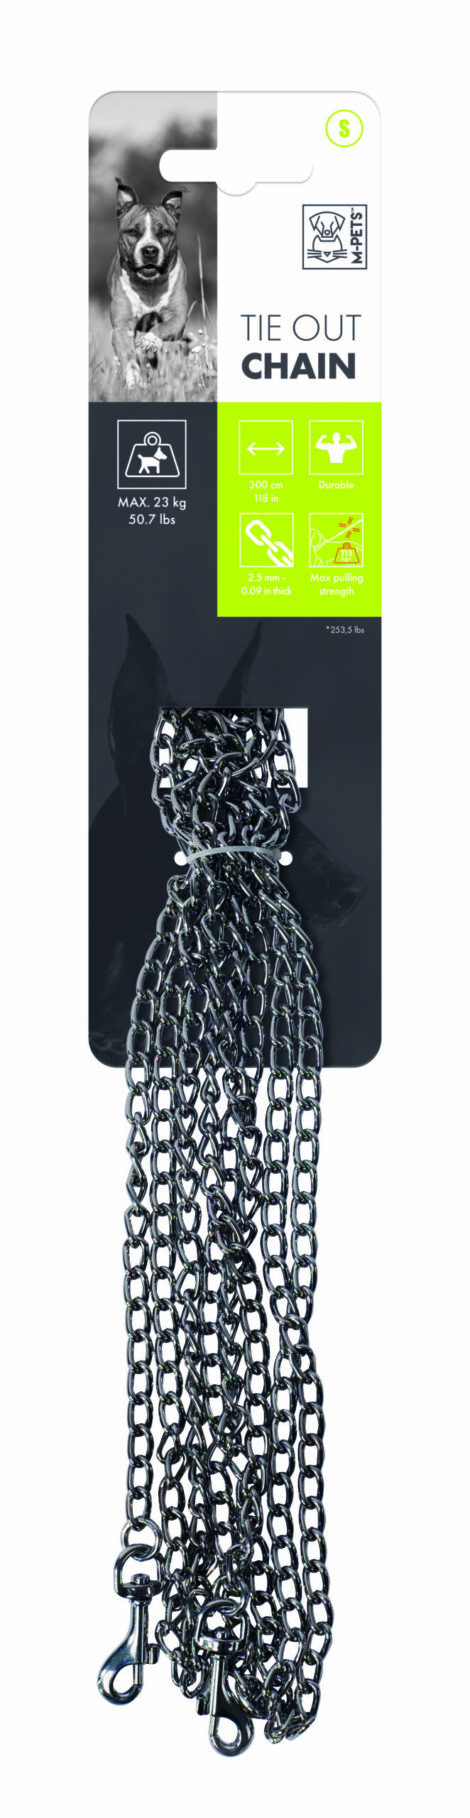 M-PETS_10831311_TIE OUT Chain S_#01_VECTOR.indd